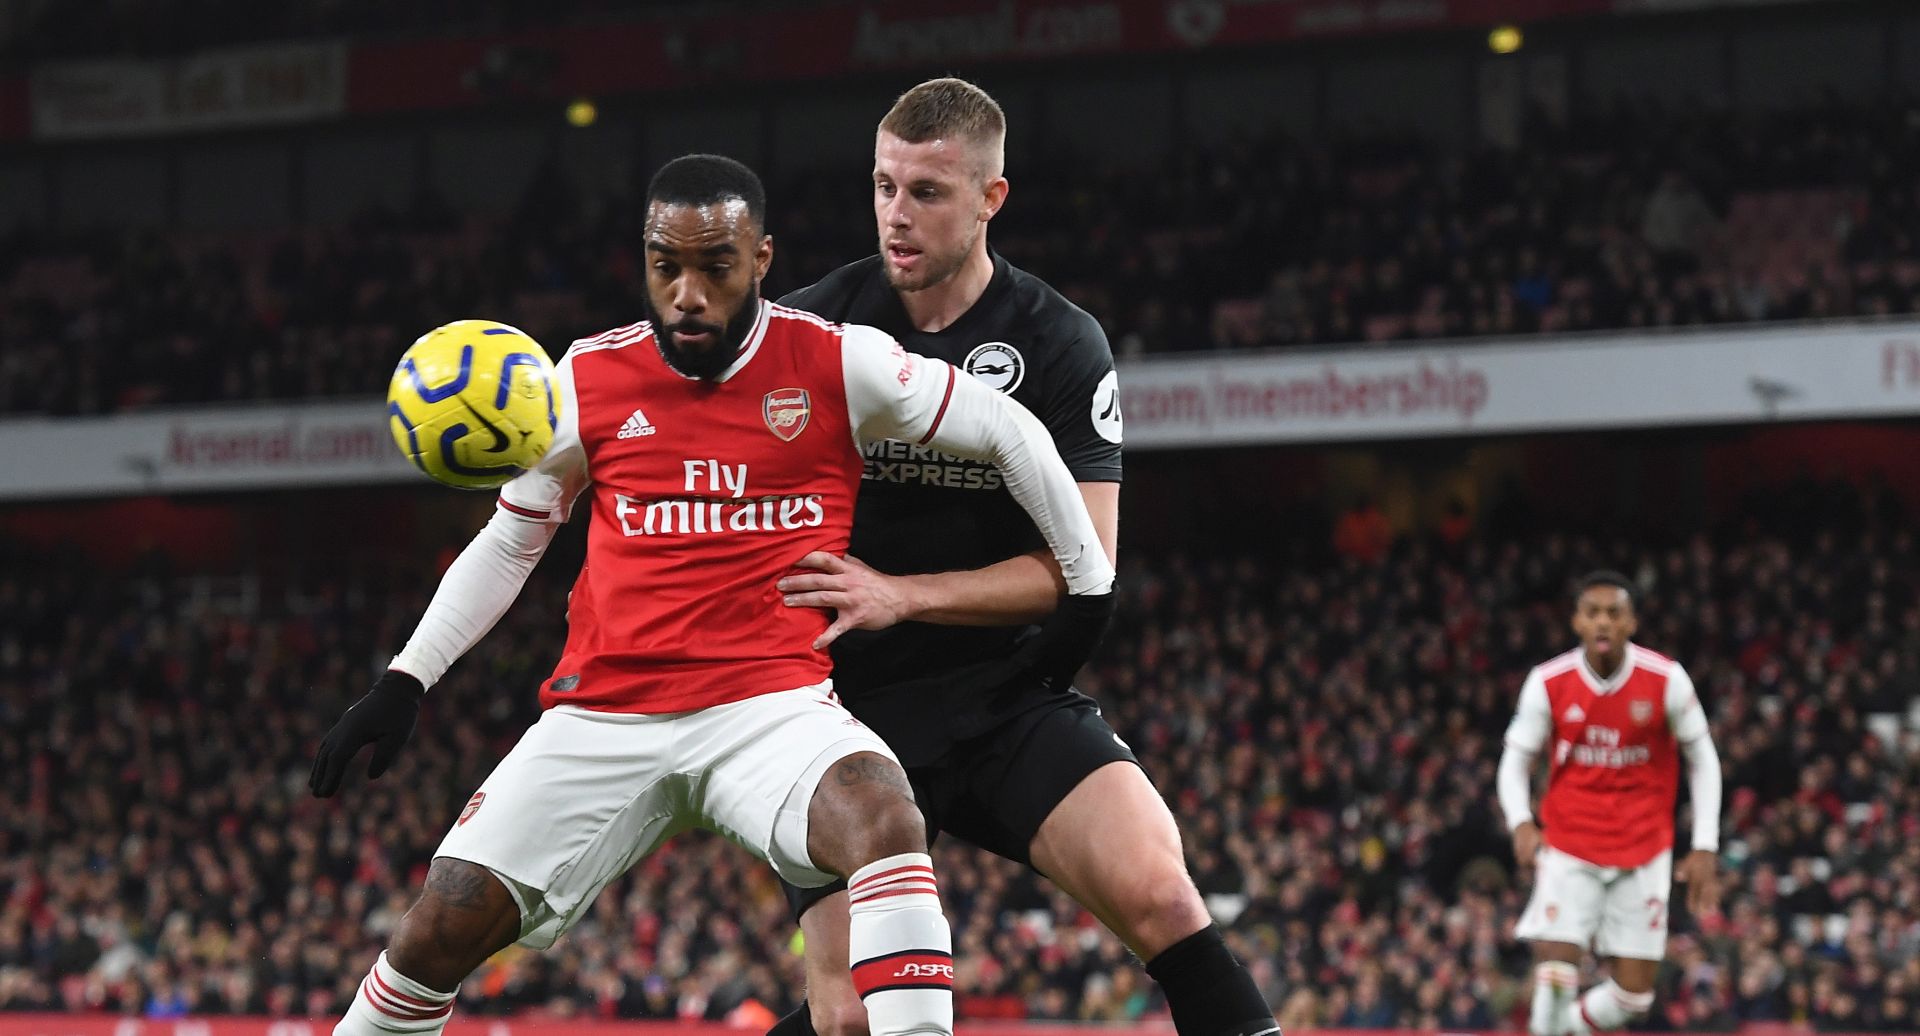 epa08047507 Arsenal's Alexandre Lacazette (L) vies for the ball with Brighton's Dale Stephens (R) during the English Premier League soccer match Arsenal v Brighton in London, Britain, 05 December 2019.  EPA/ANDY RAIN EDITORIAL USE ONLY. No use with unauthorized audio, video, data, fixture lists, club/league logos or 'live' services. Online in-match use limited to 120 images, no video emulation. No use in betting, games or single club/league/player publications